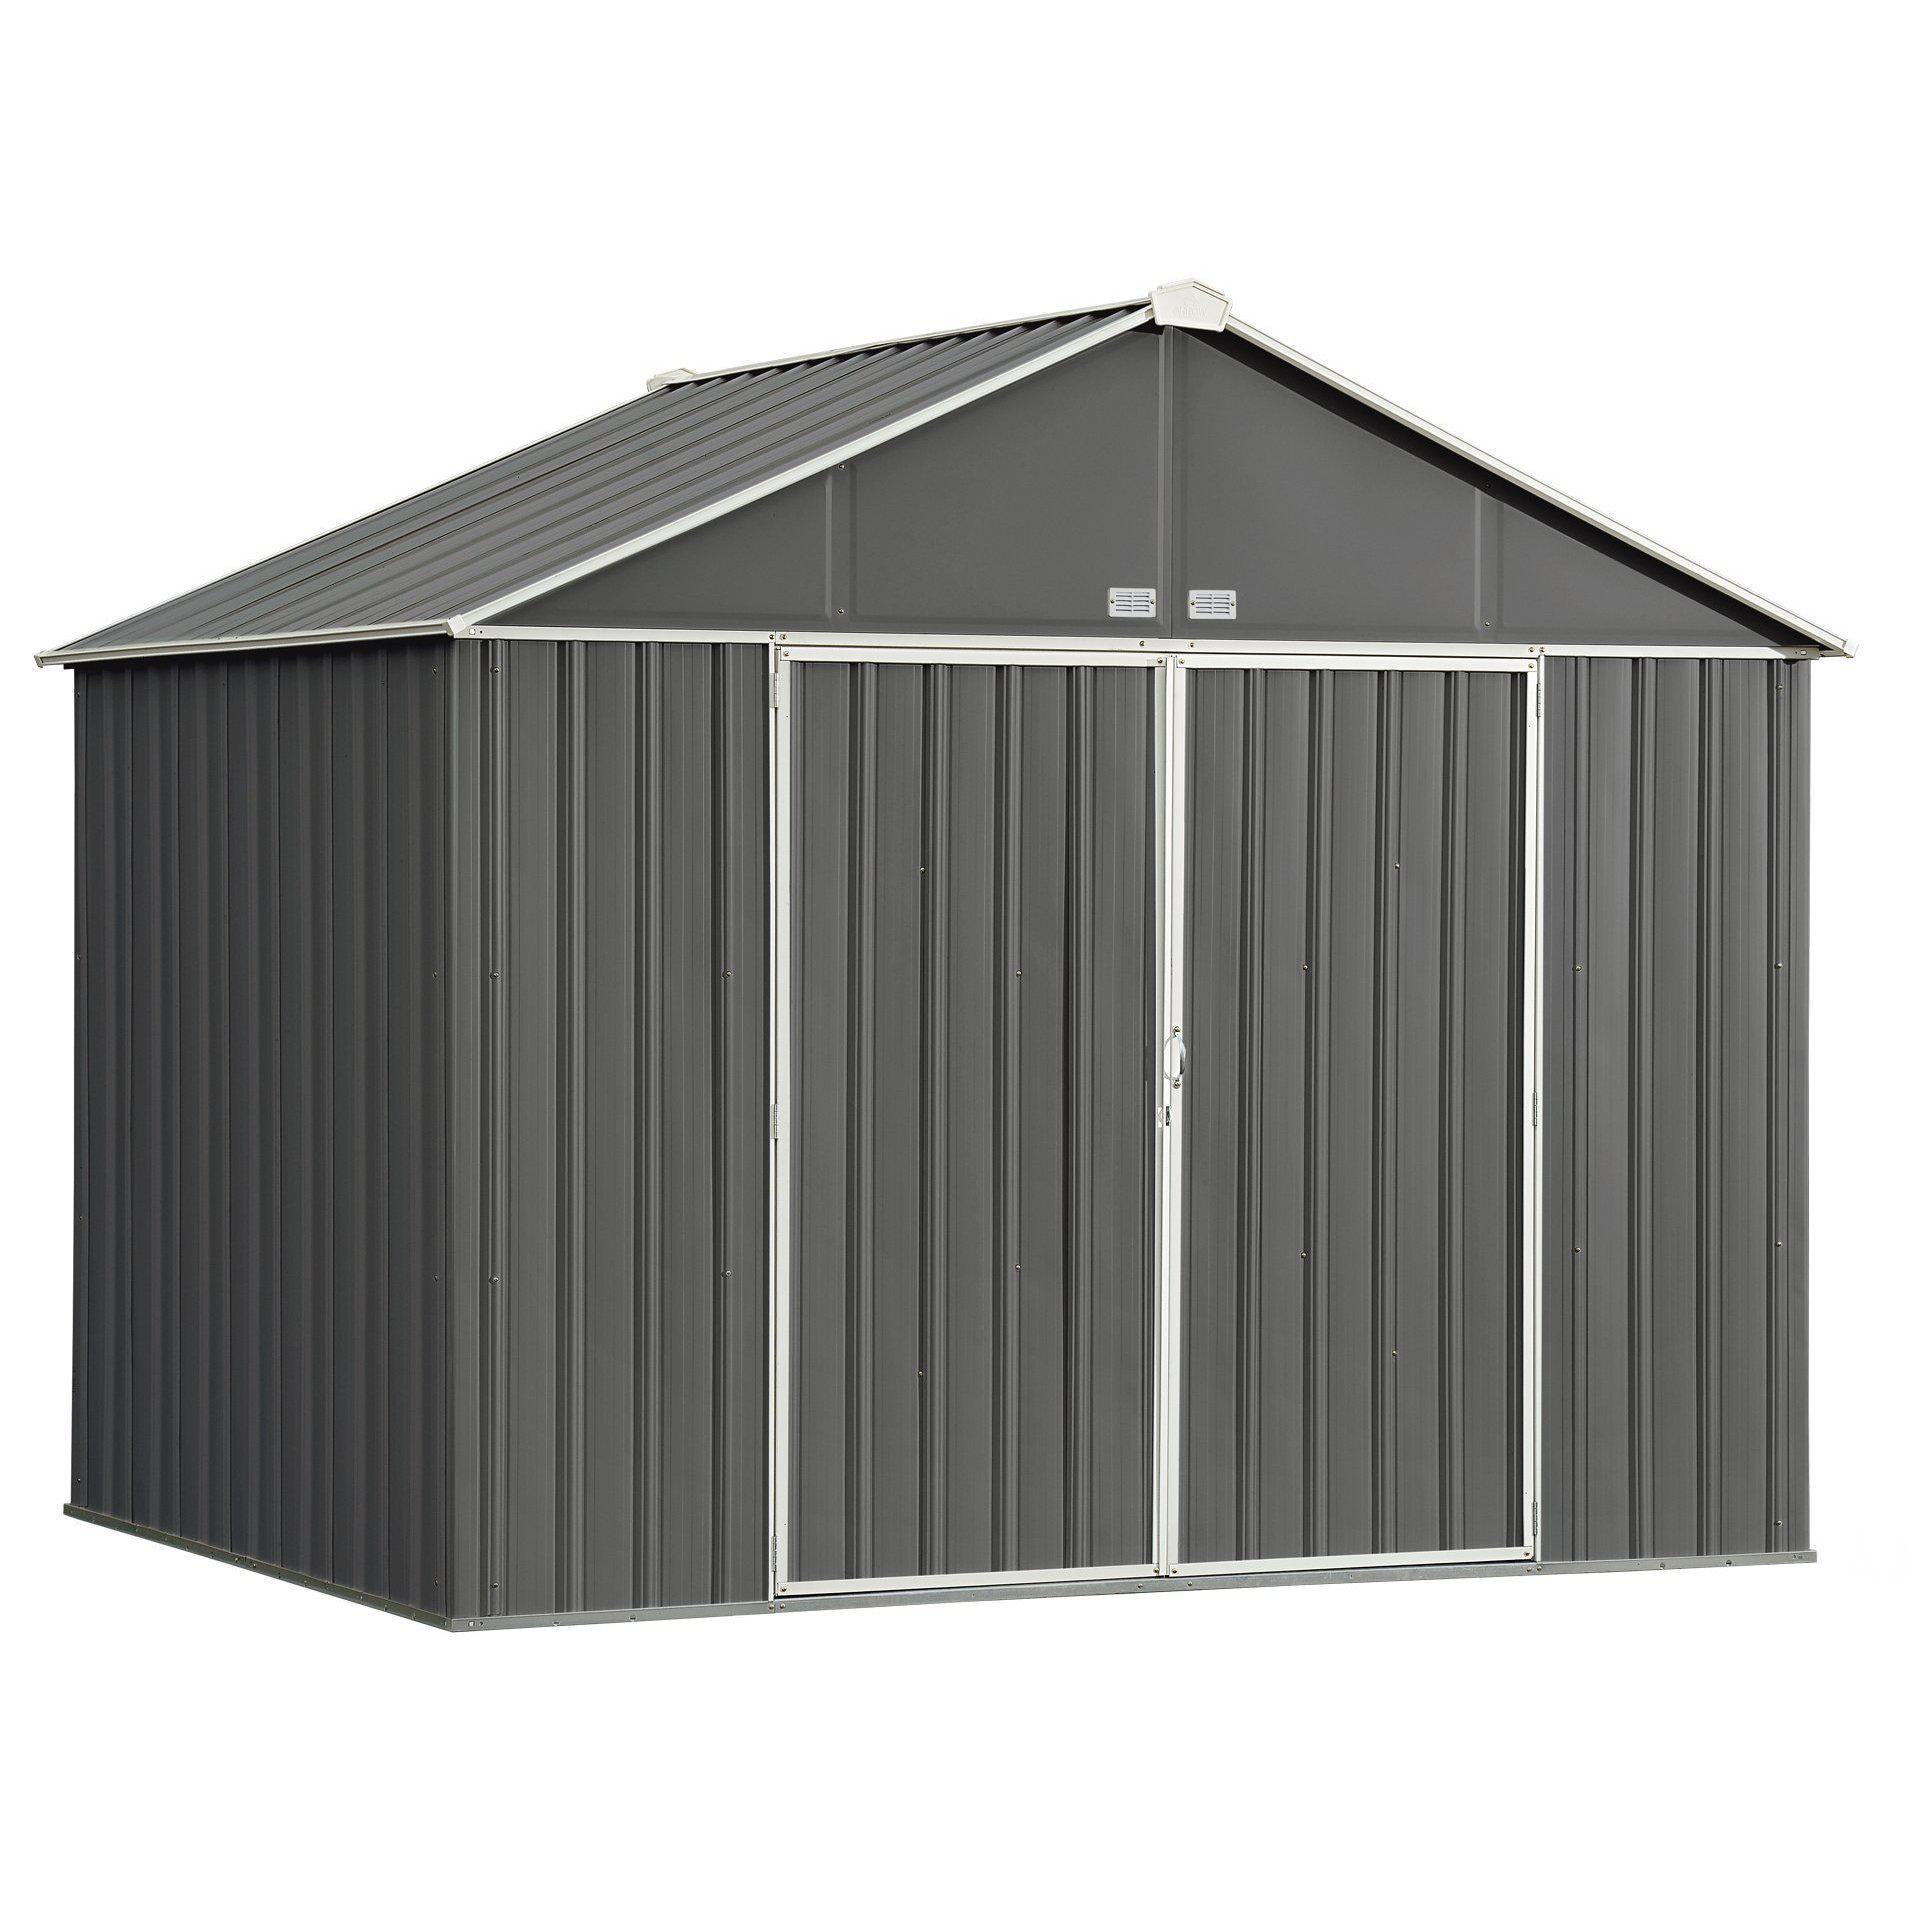 Arrow EZEE Shed Extra High Gable Steel Storage Shed, Charcoal/Cream Trim, 10 x 8 ft.